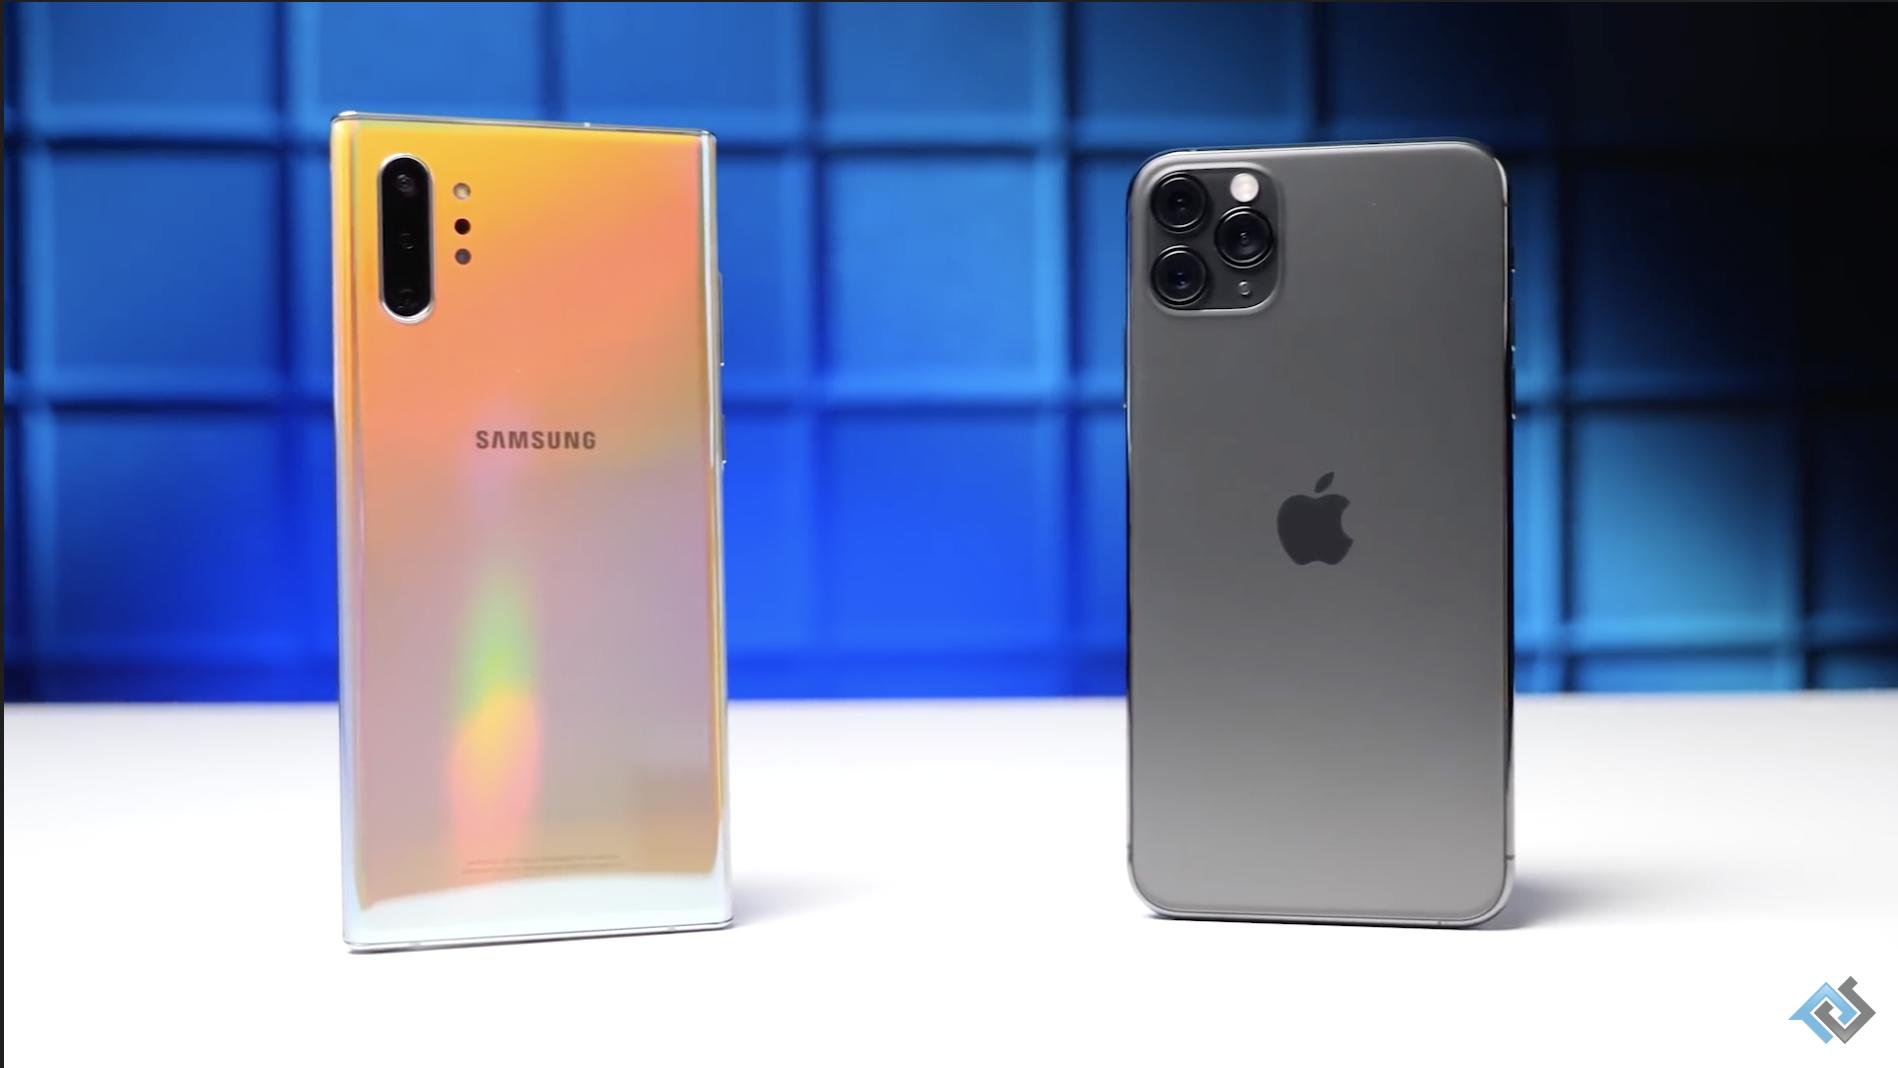 Phonebuff iPhone 11 and Galaxy Note 10+ drop test video